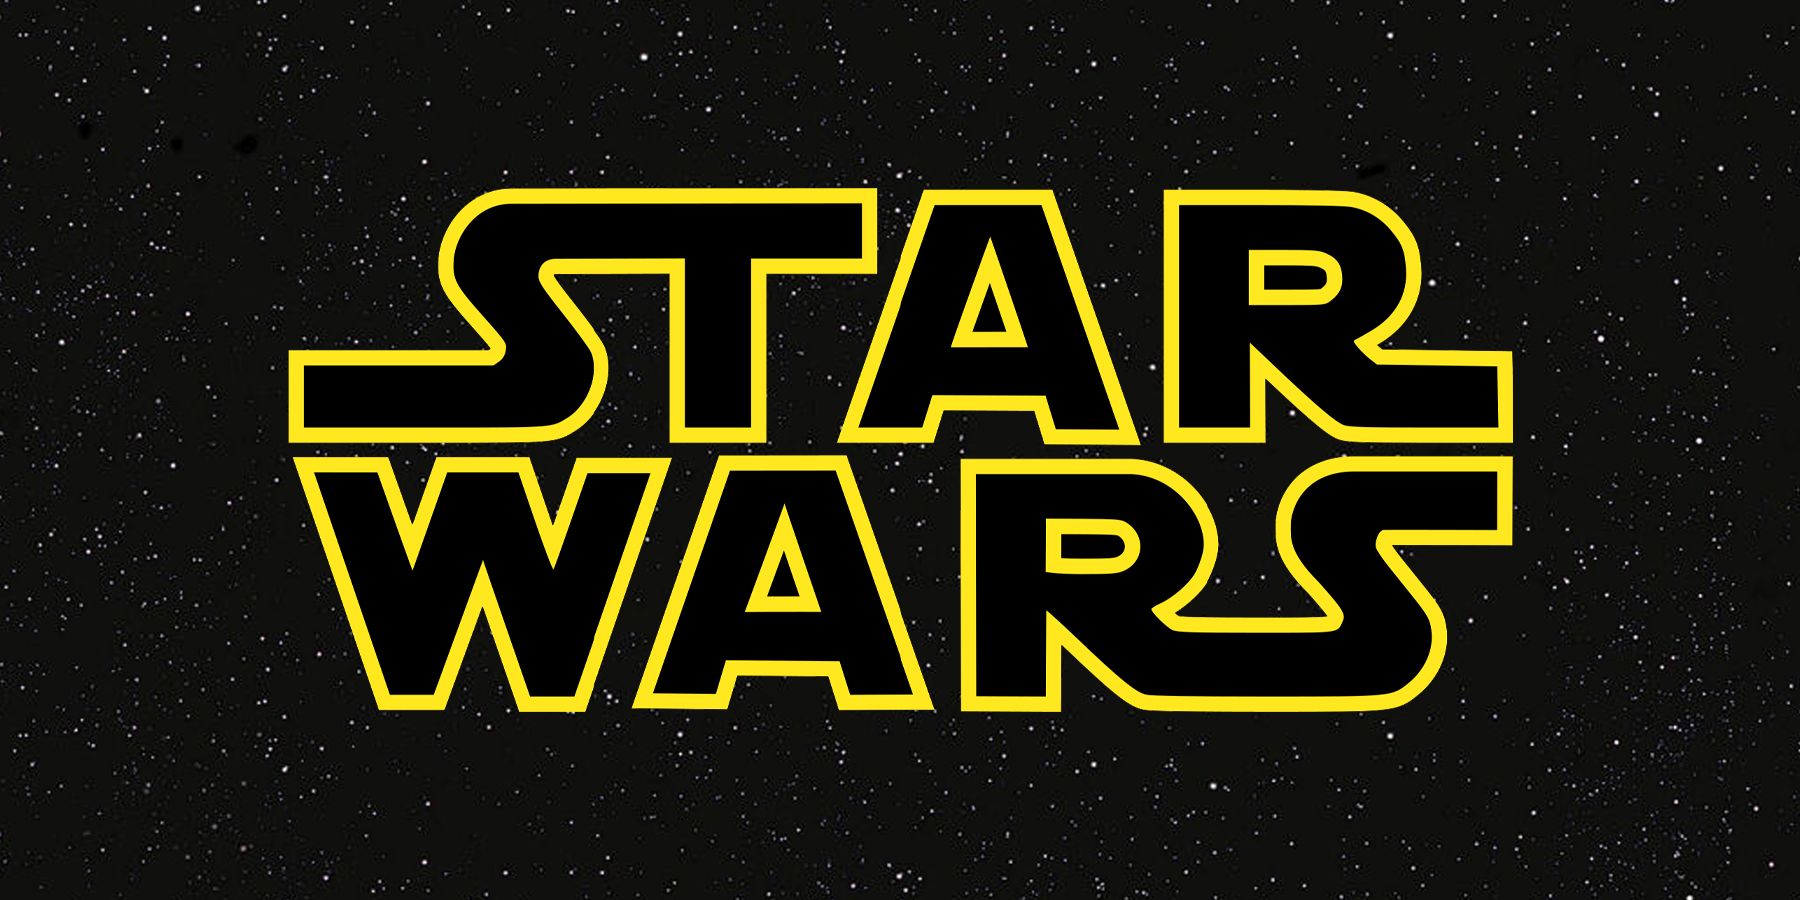 The Star Wars text logo with stars.